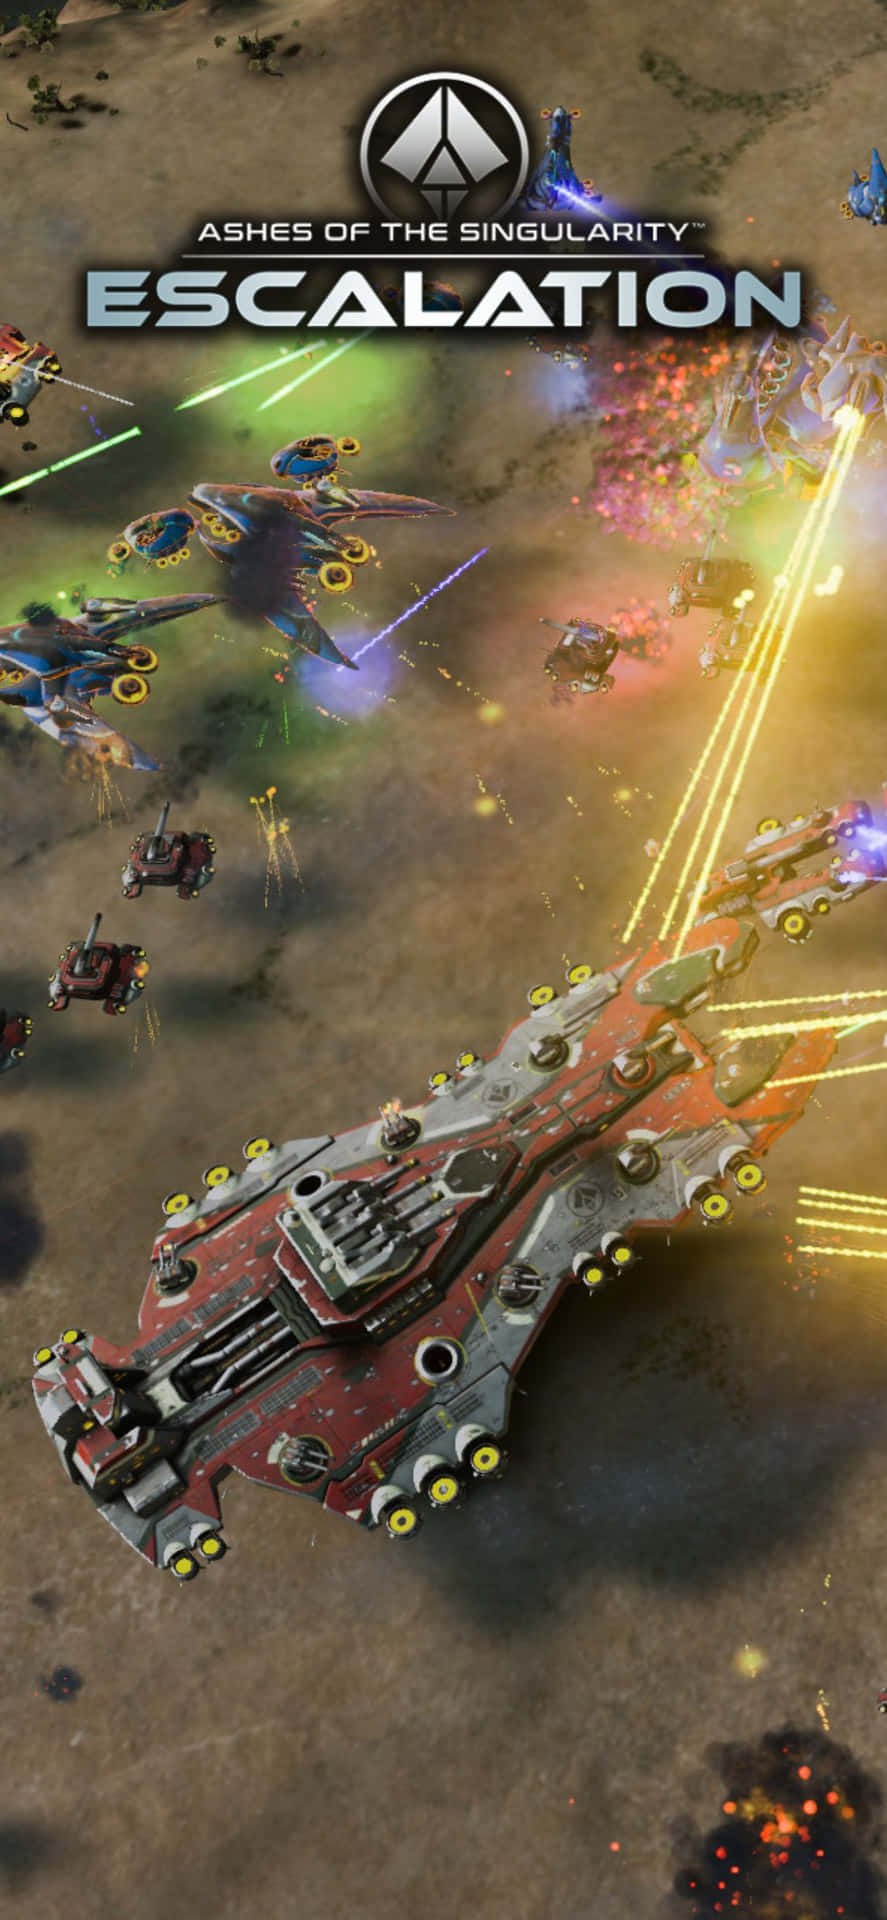 Explore The Expansive Worlds of Ashes Of The Singularity Escalation on Your Iphone X